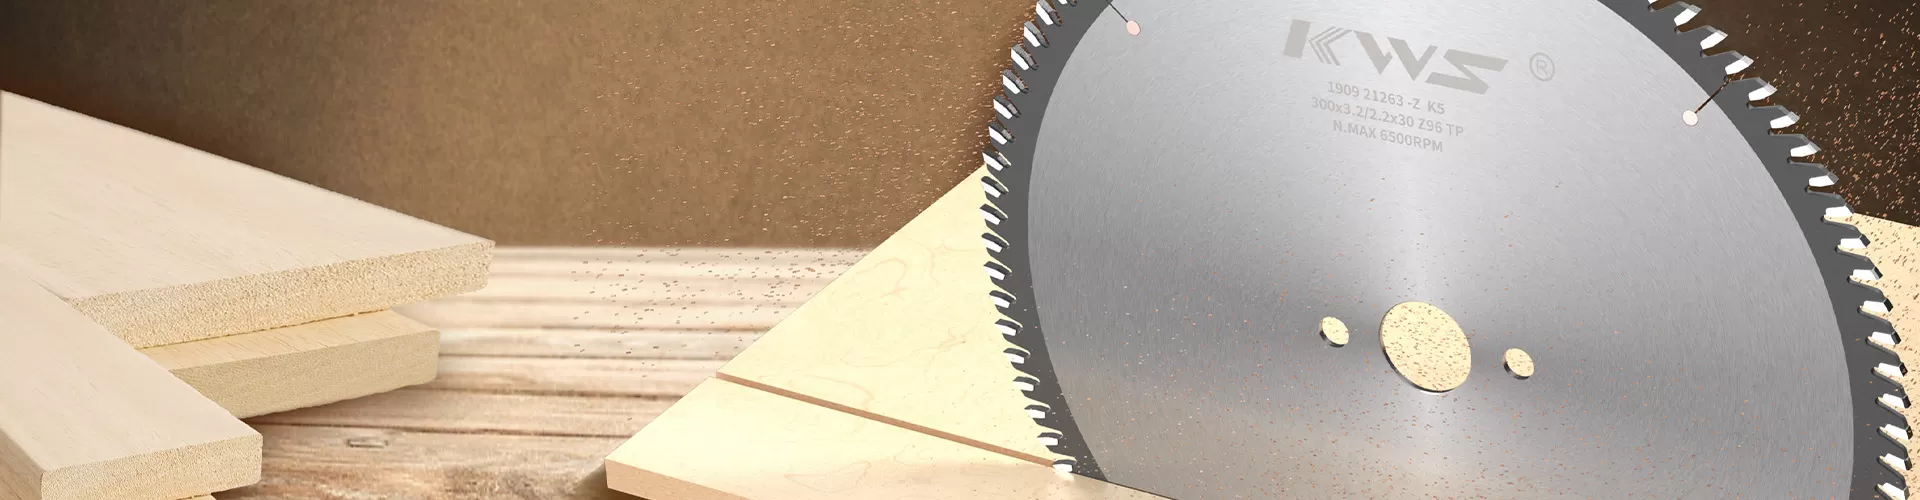 Cold Saw for Manual Device